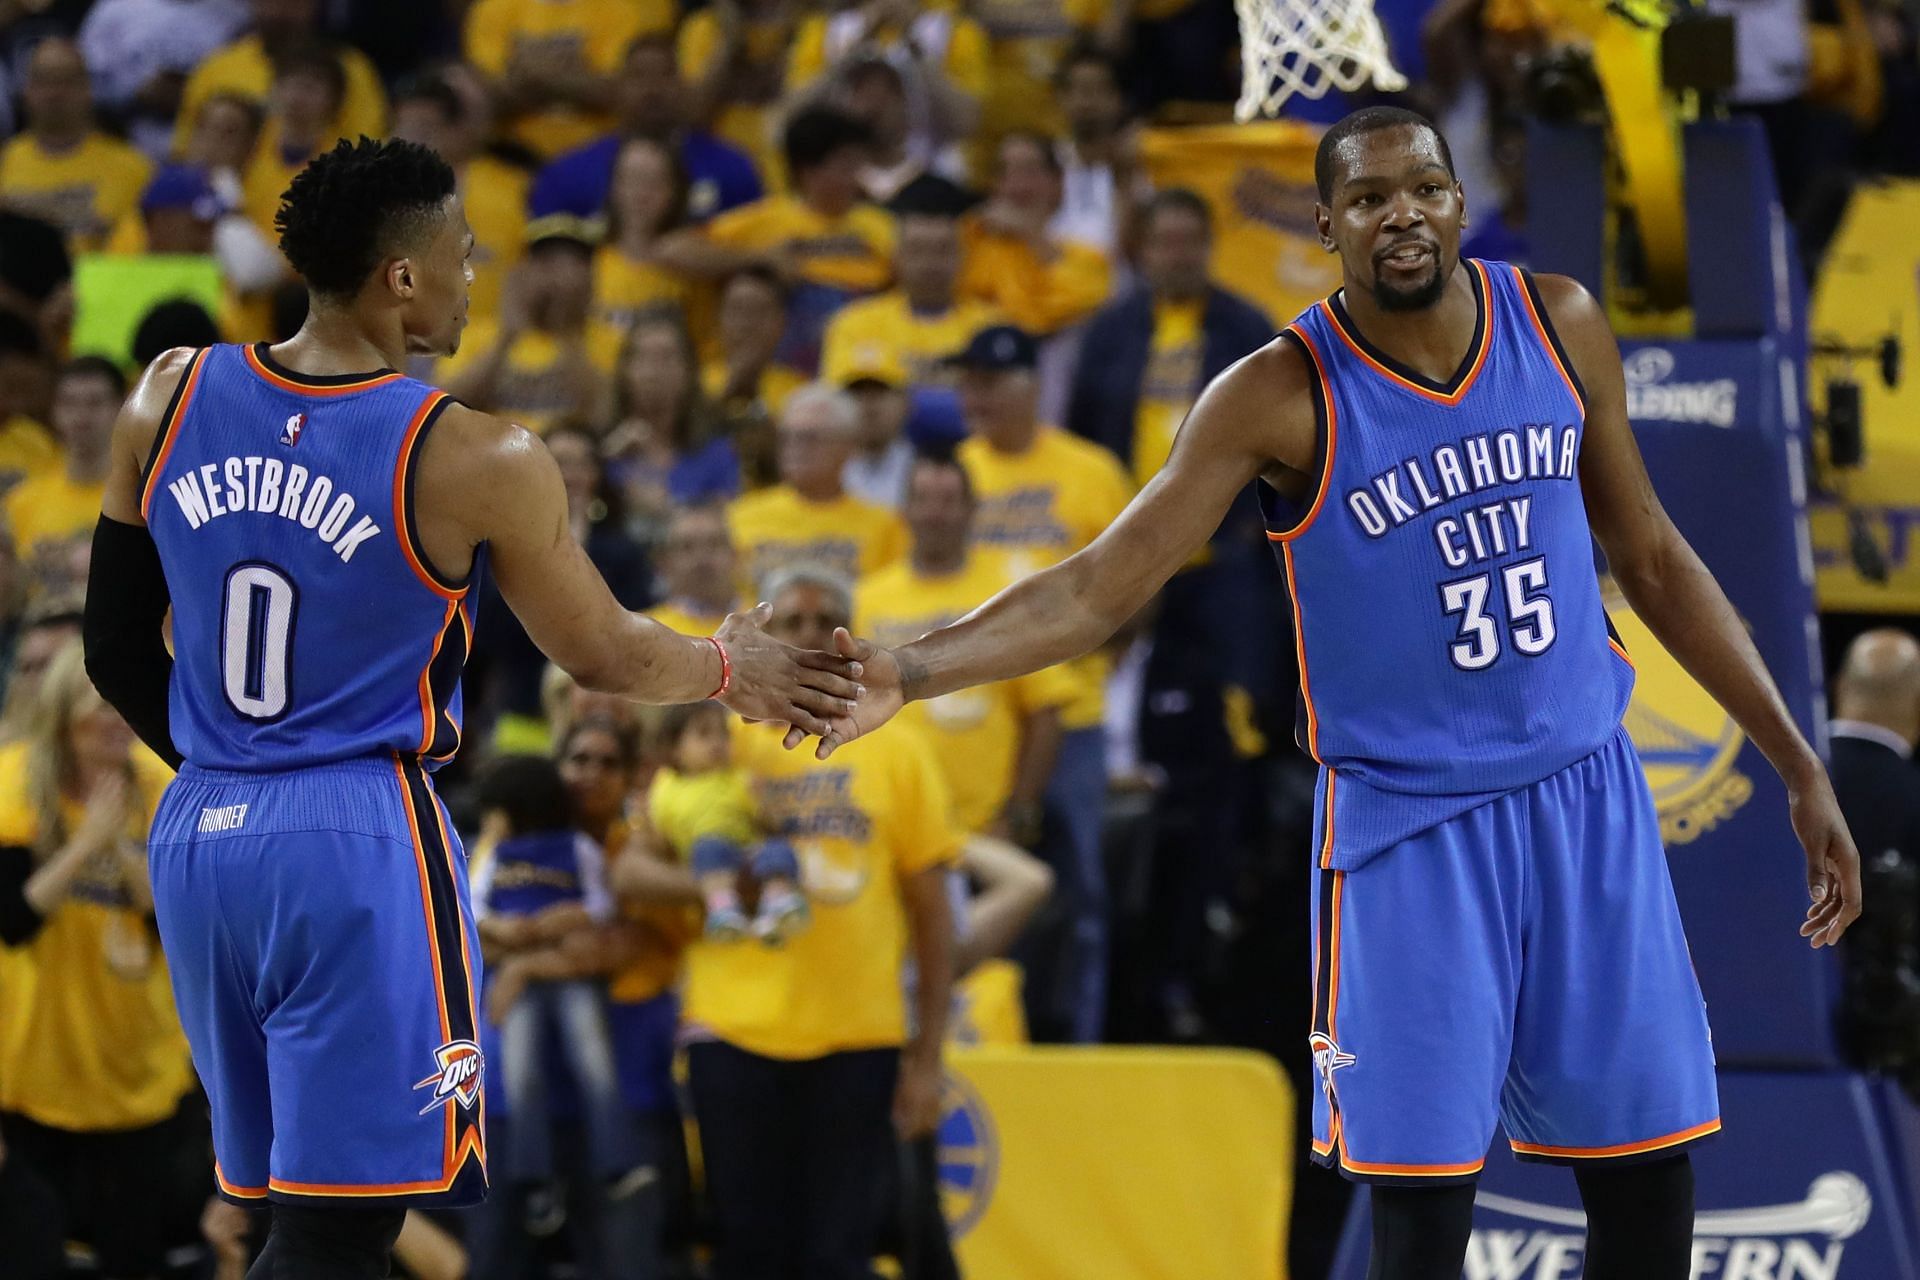 Westbrook and Kevein Durant for the OKC Thunder